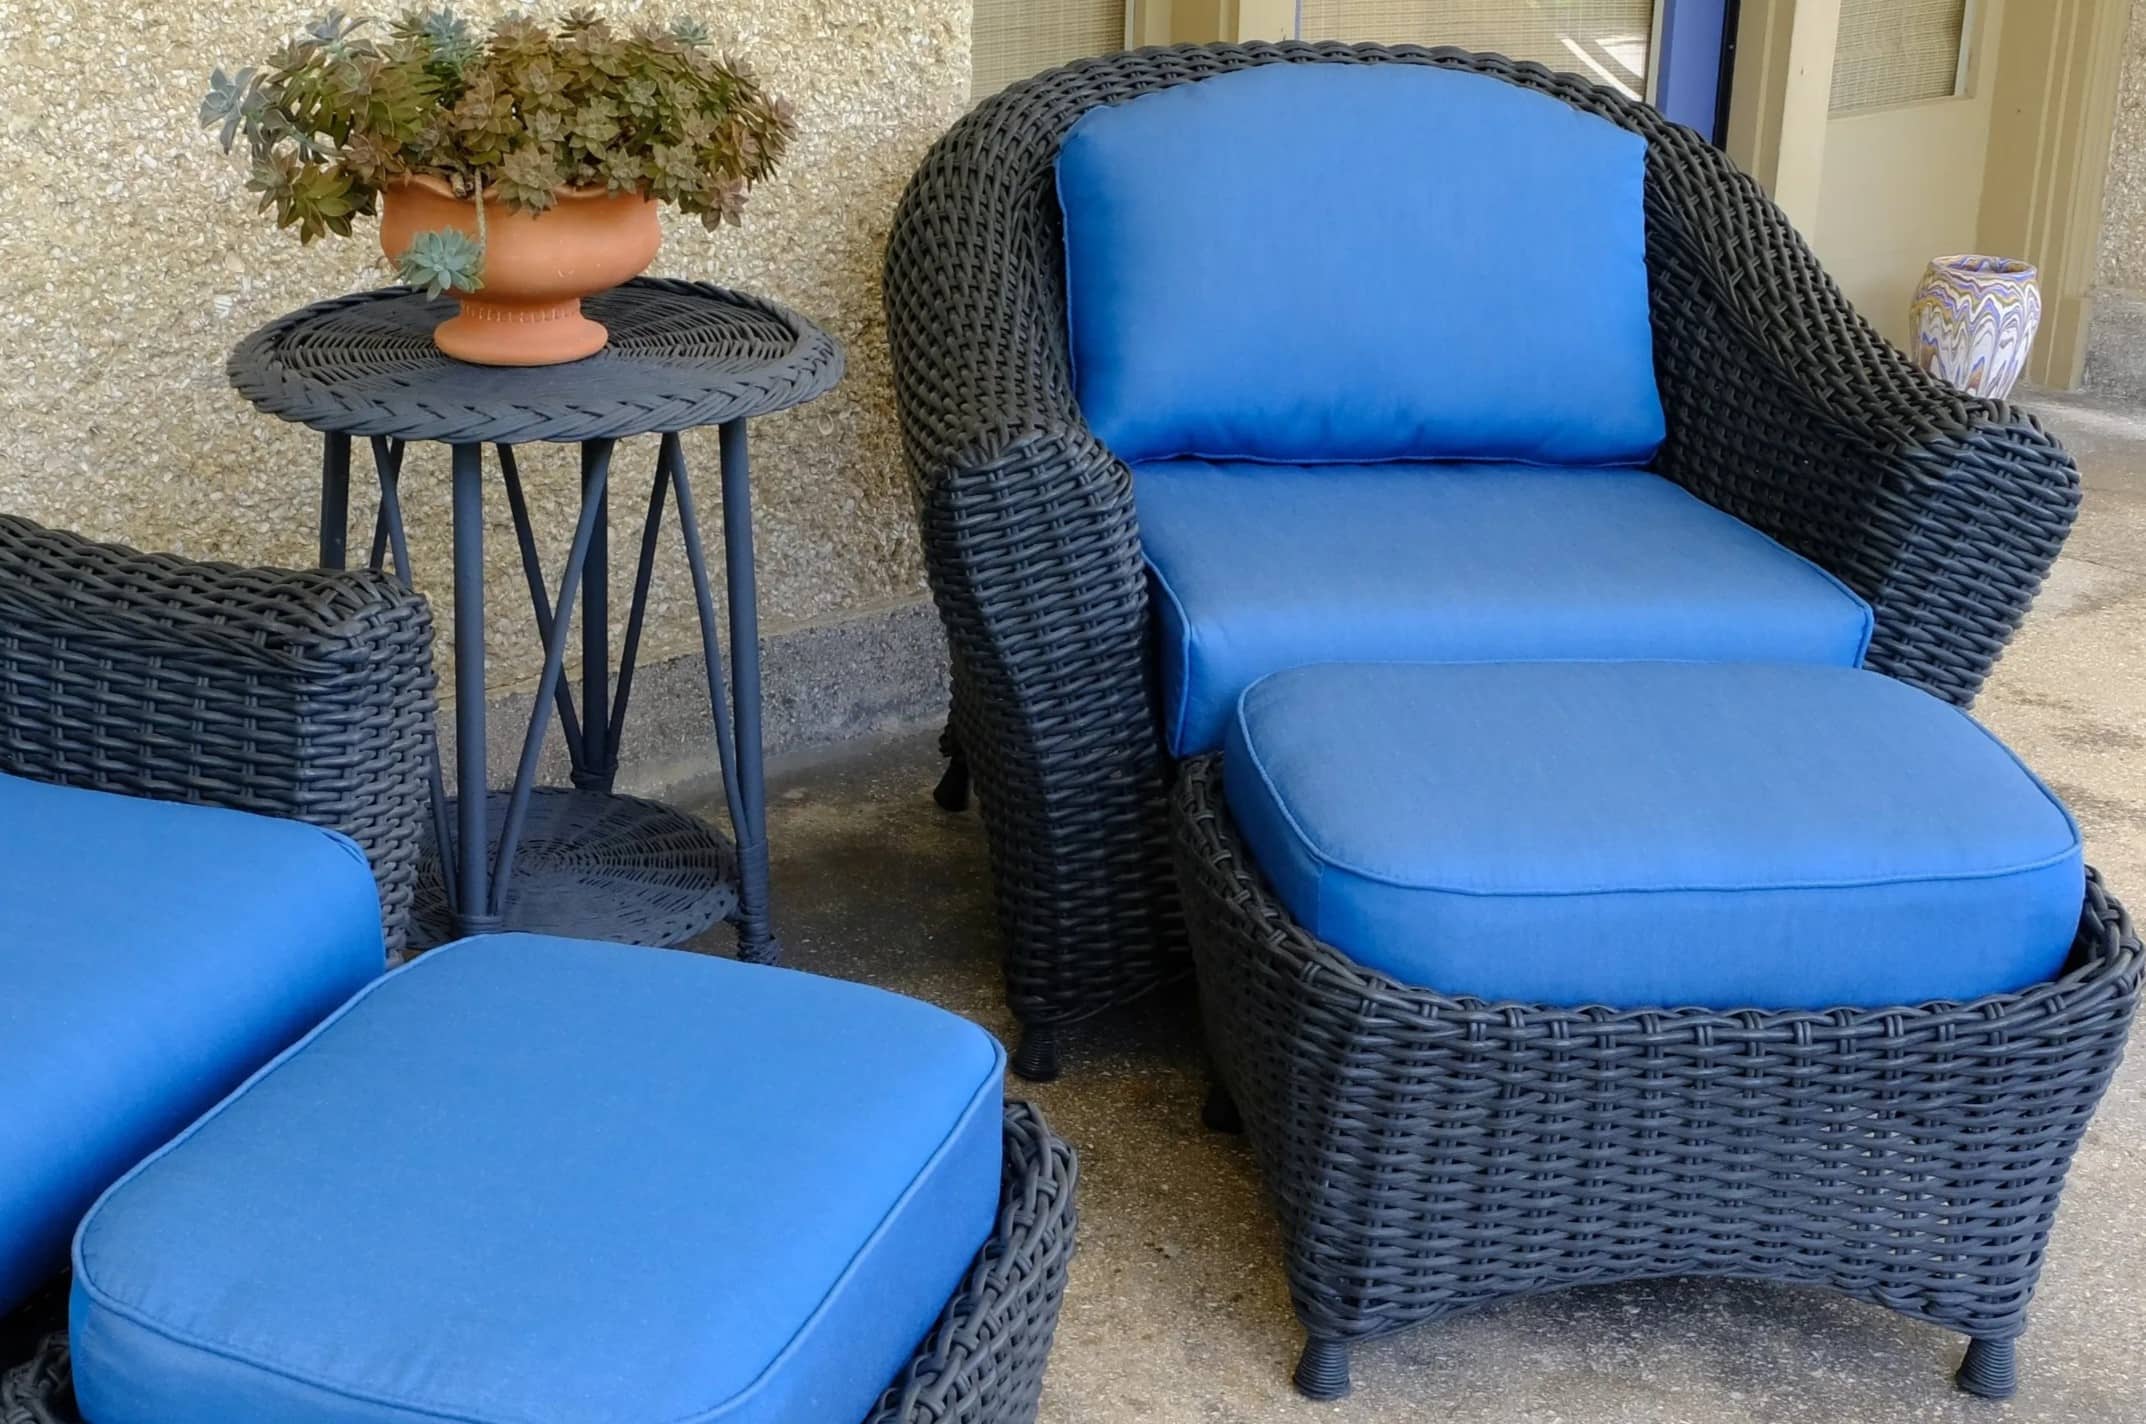 https://storables.com/wp-content/uploads/2023/12/10-best-seat-cushions-for-patio-chairs-for-2023-1703139862.jpg